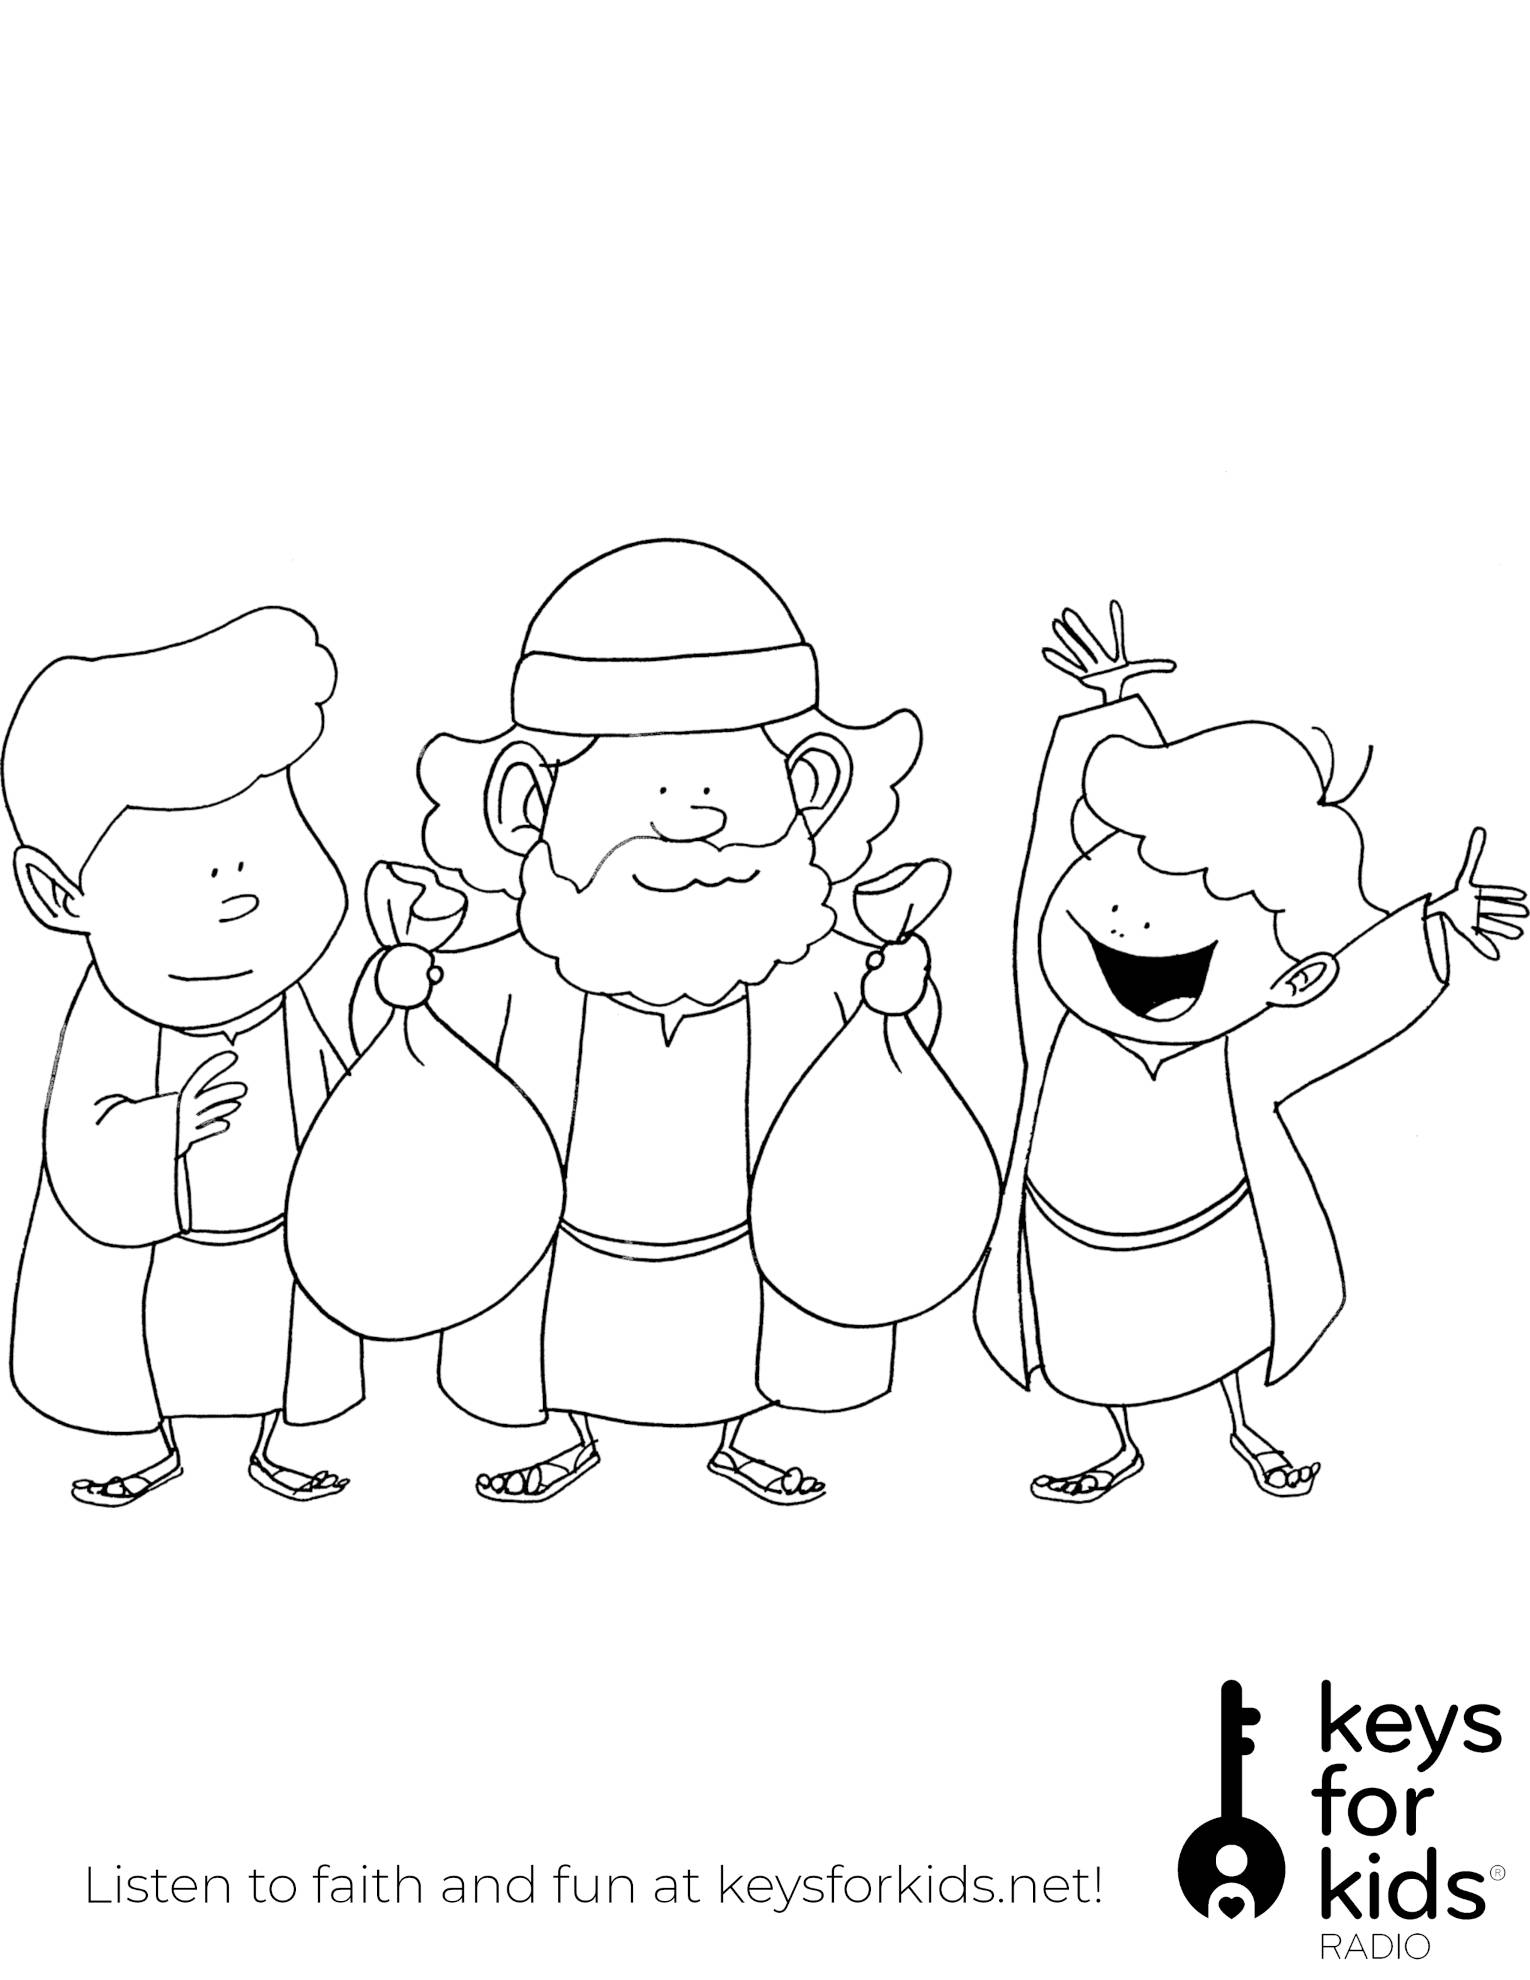 Prodigal Son coloring page